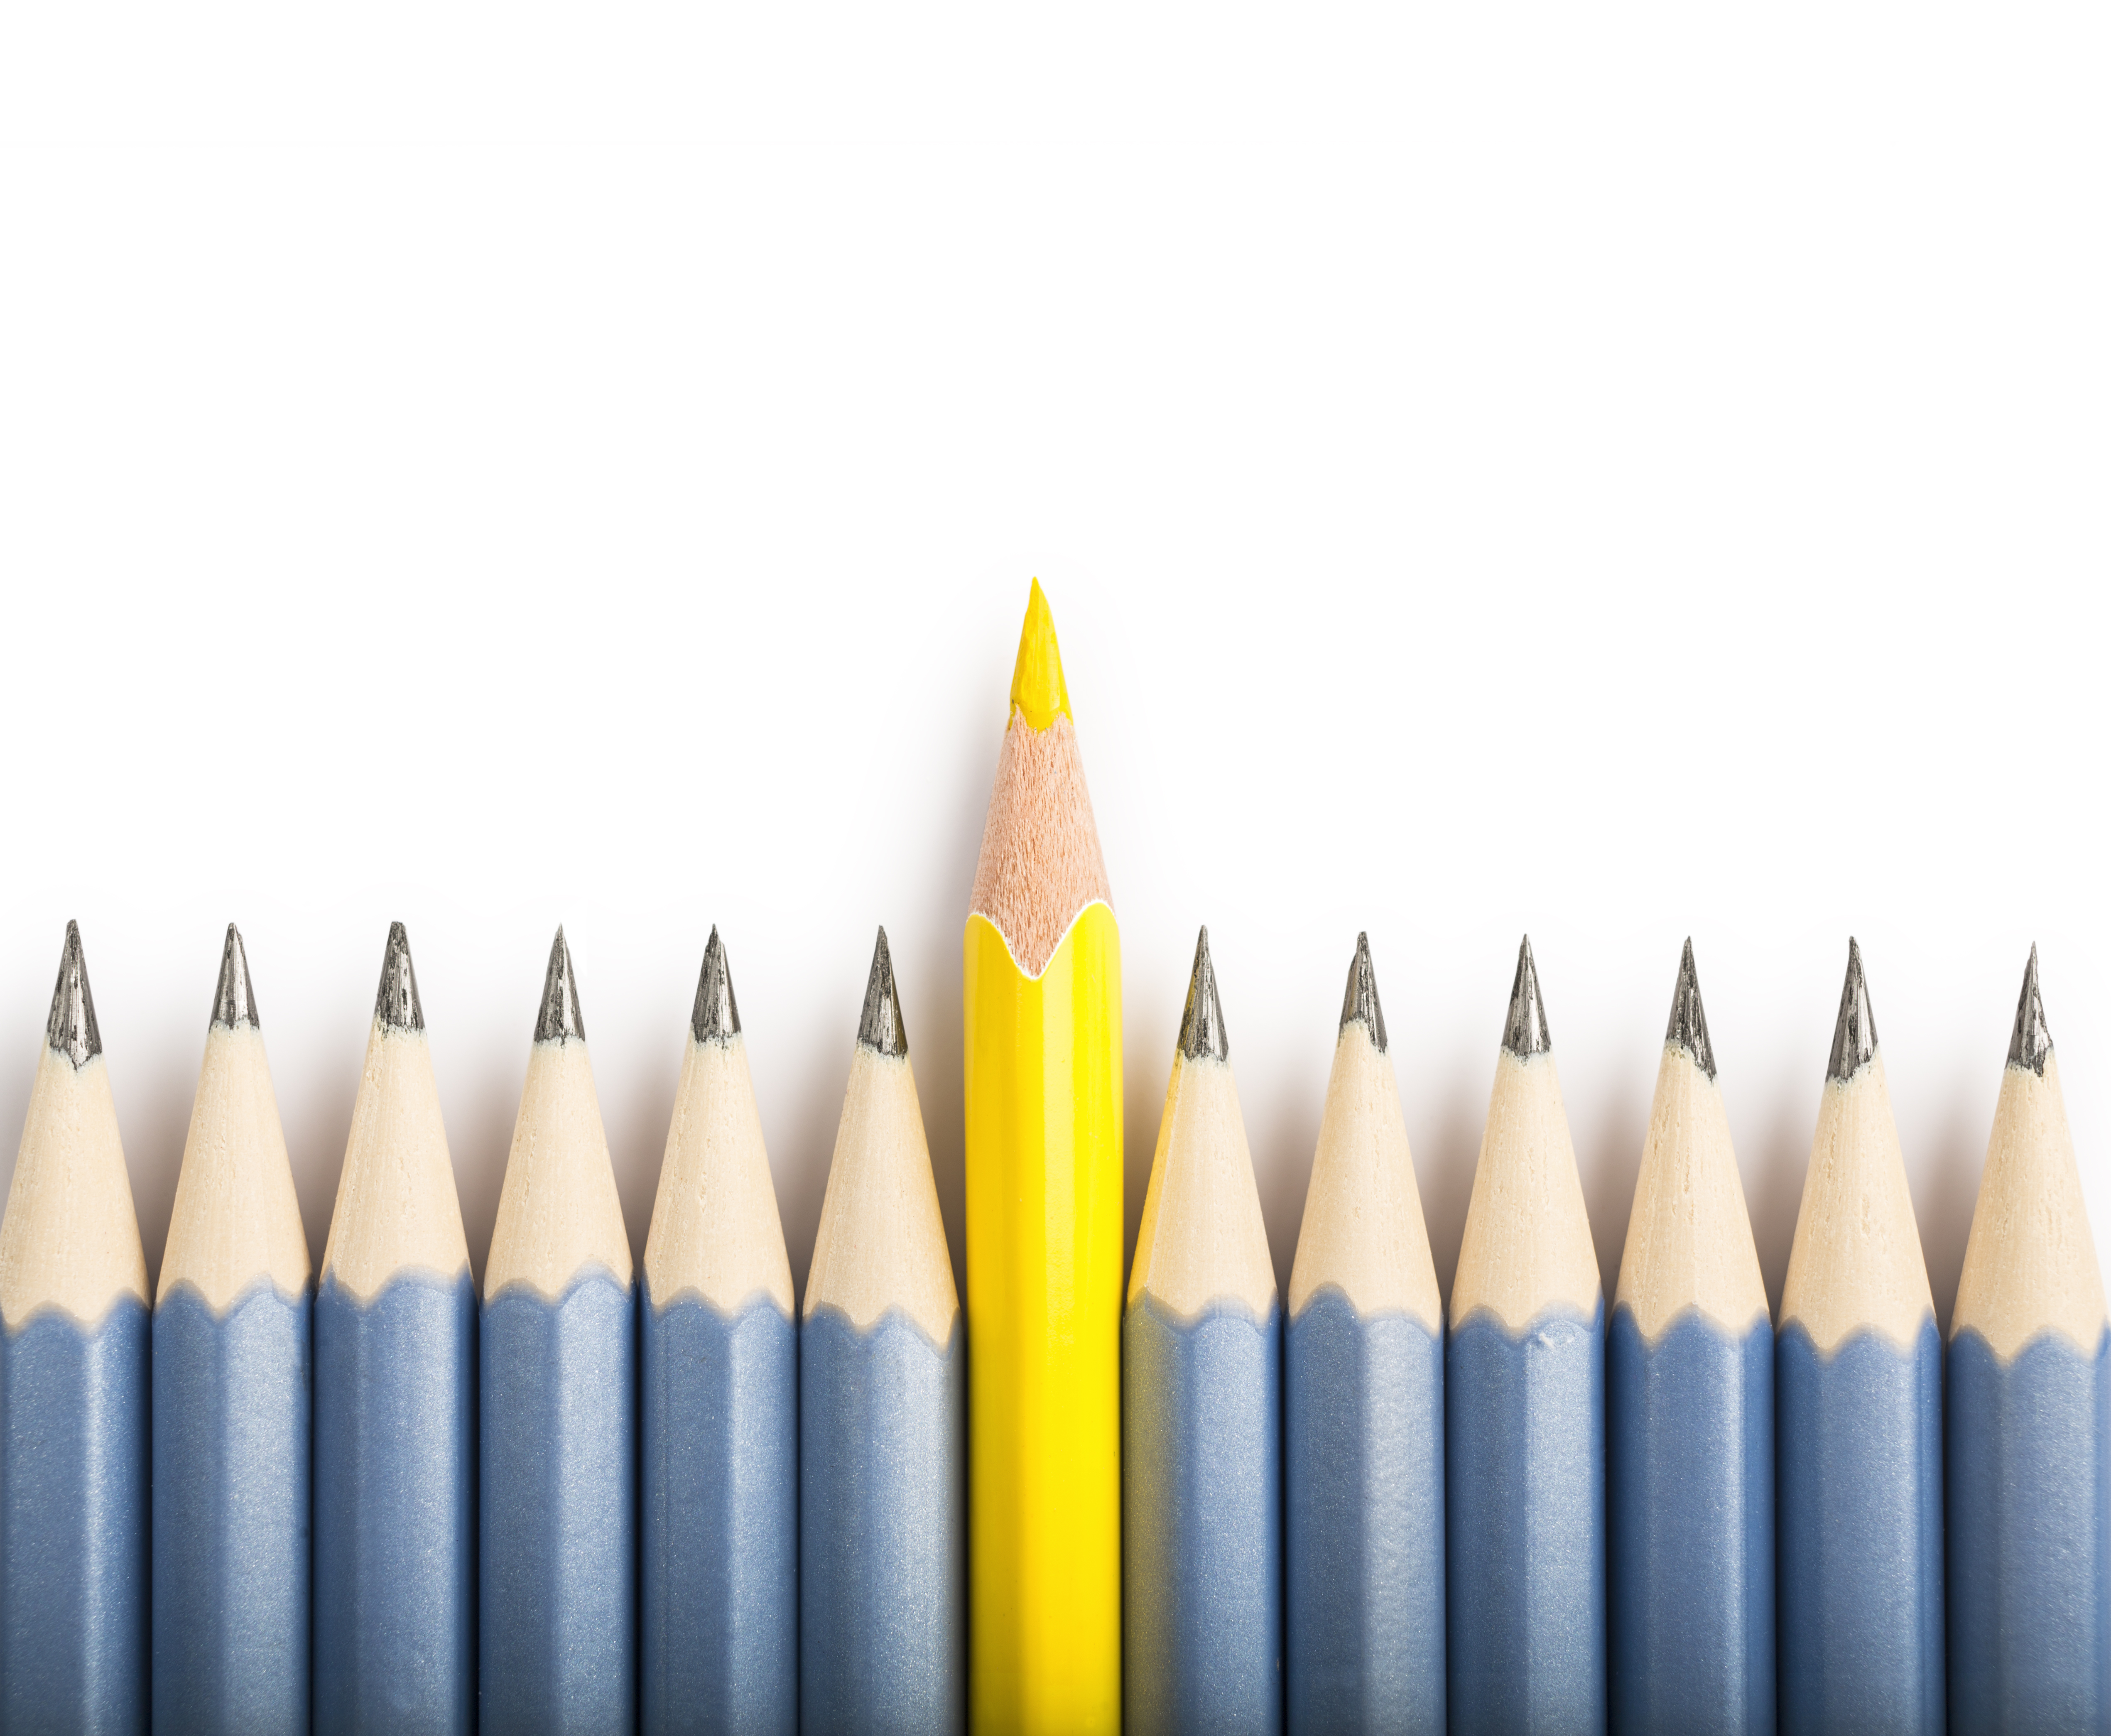 View directly from above of a group of pencils in which a yellow pencil differs from the others and stands out from the crowd. Concept of individual, standing out from the crowd and business purposes. The crayons are nicely isolated on a white background, with a natural shadow (studio shot in macro mode).